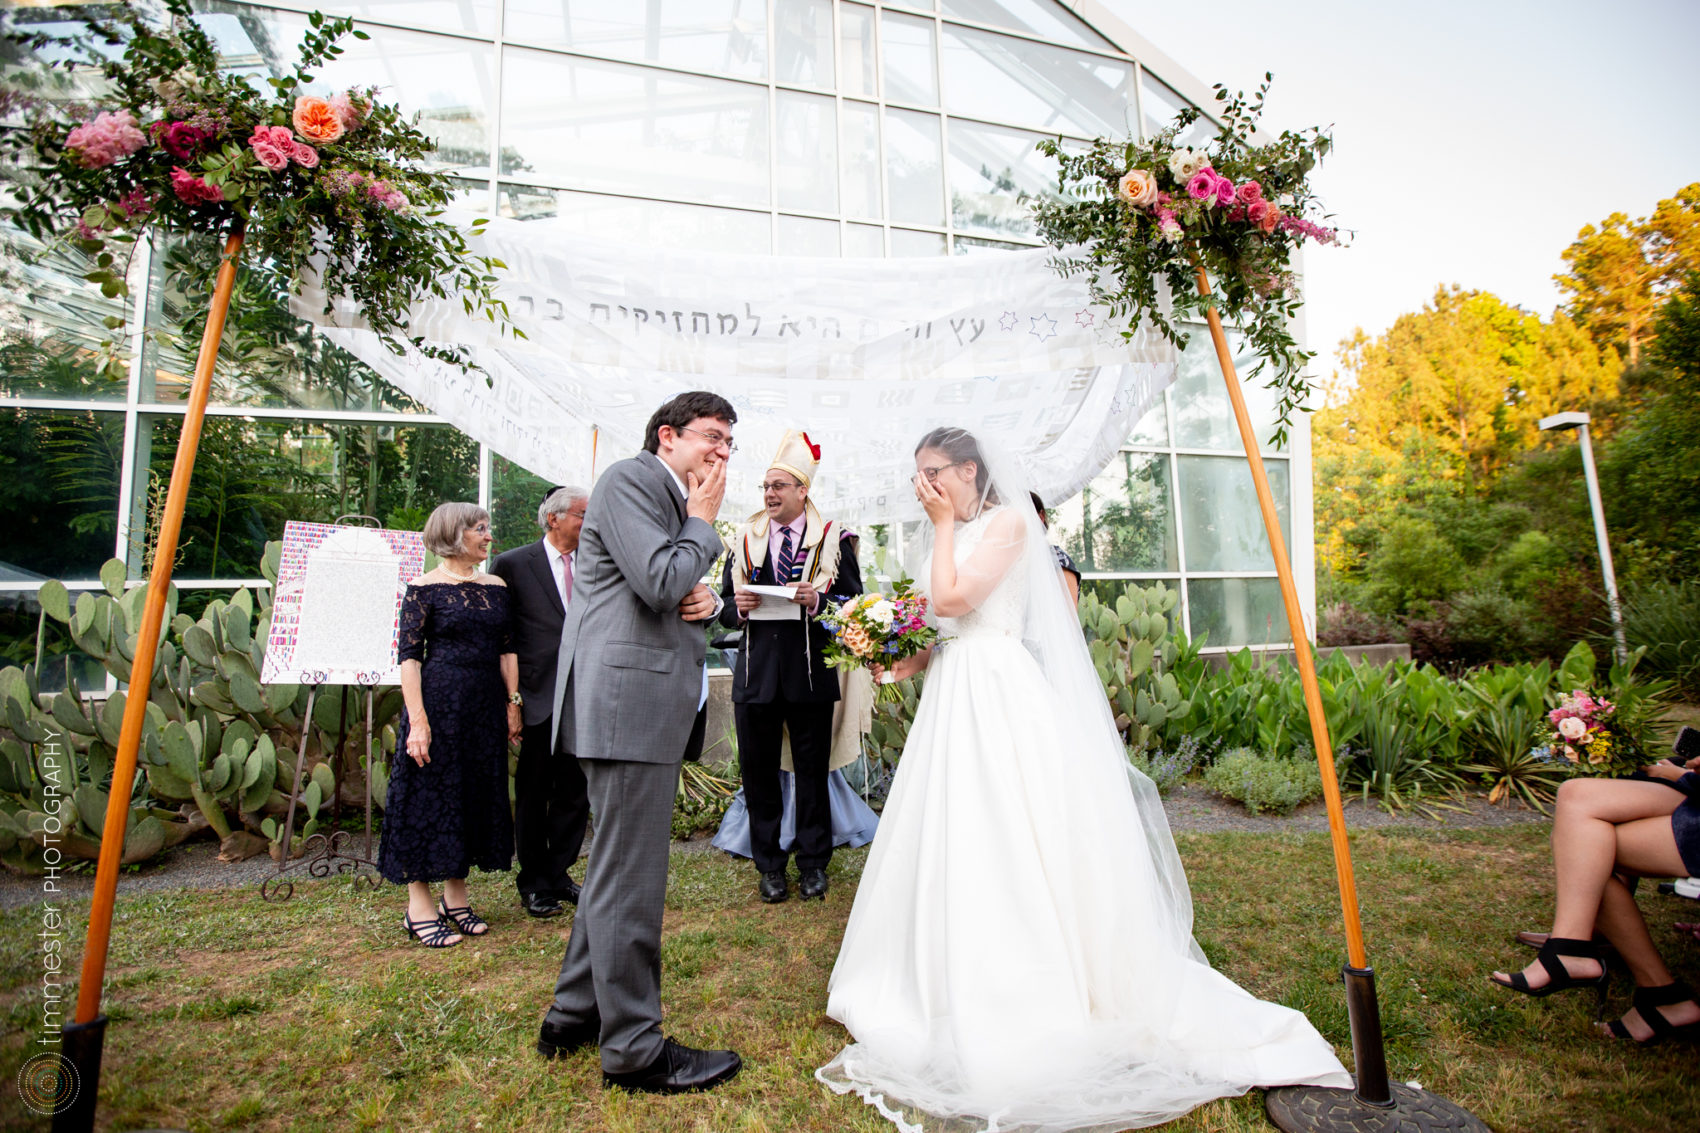 An outdoor wedding ceremony at the Museum of Life and Science in Durham, NC